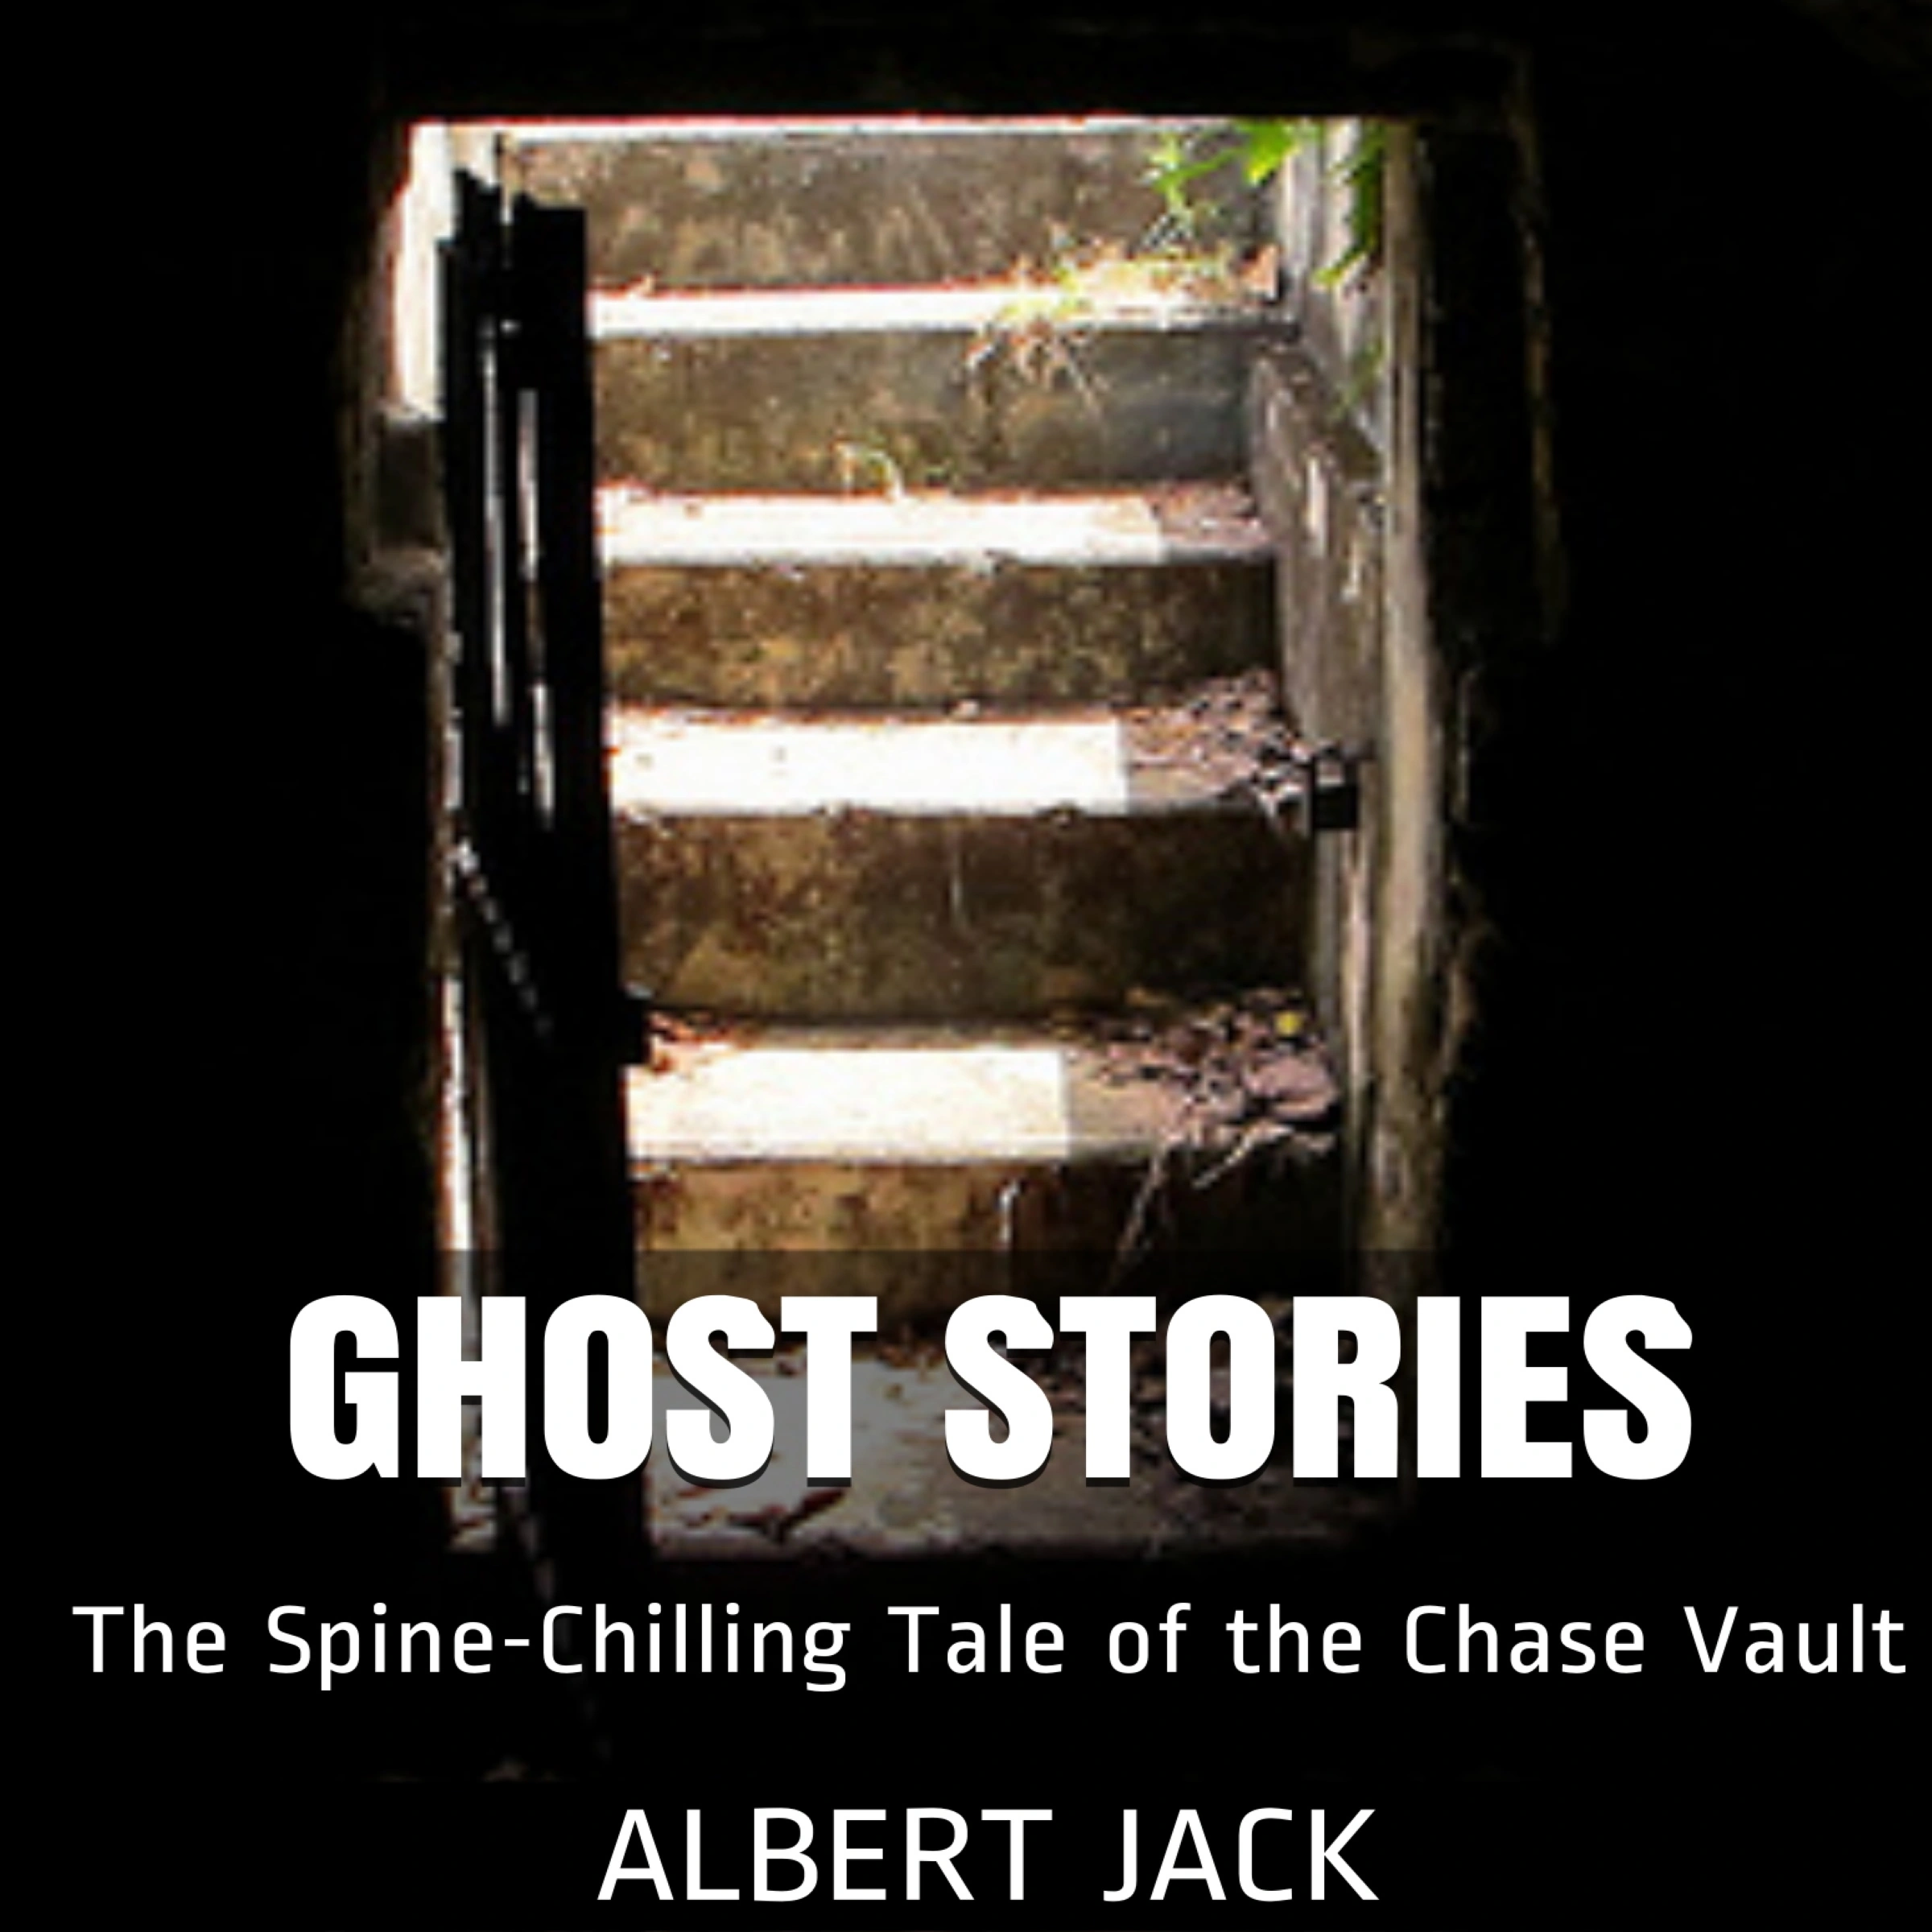 Ghost Stories: The Spine-Chilling Tale of the Chase Vault Audiobook by Albert Jack